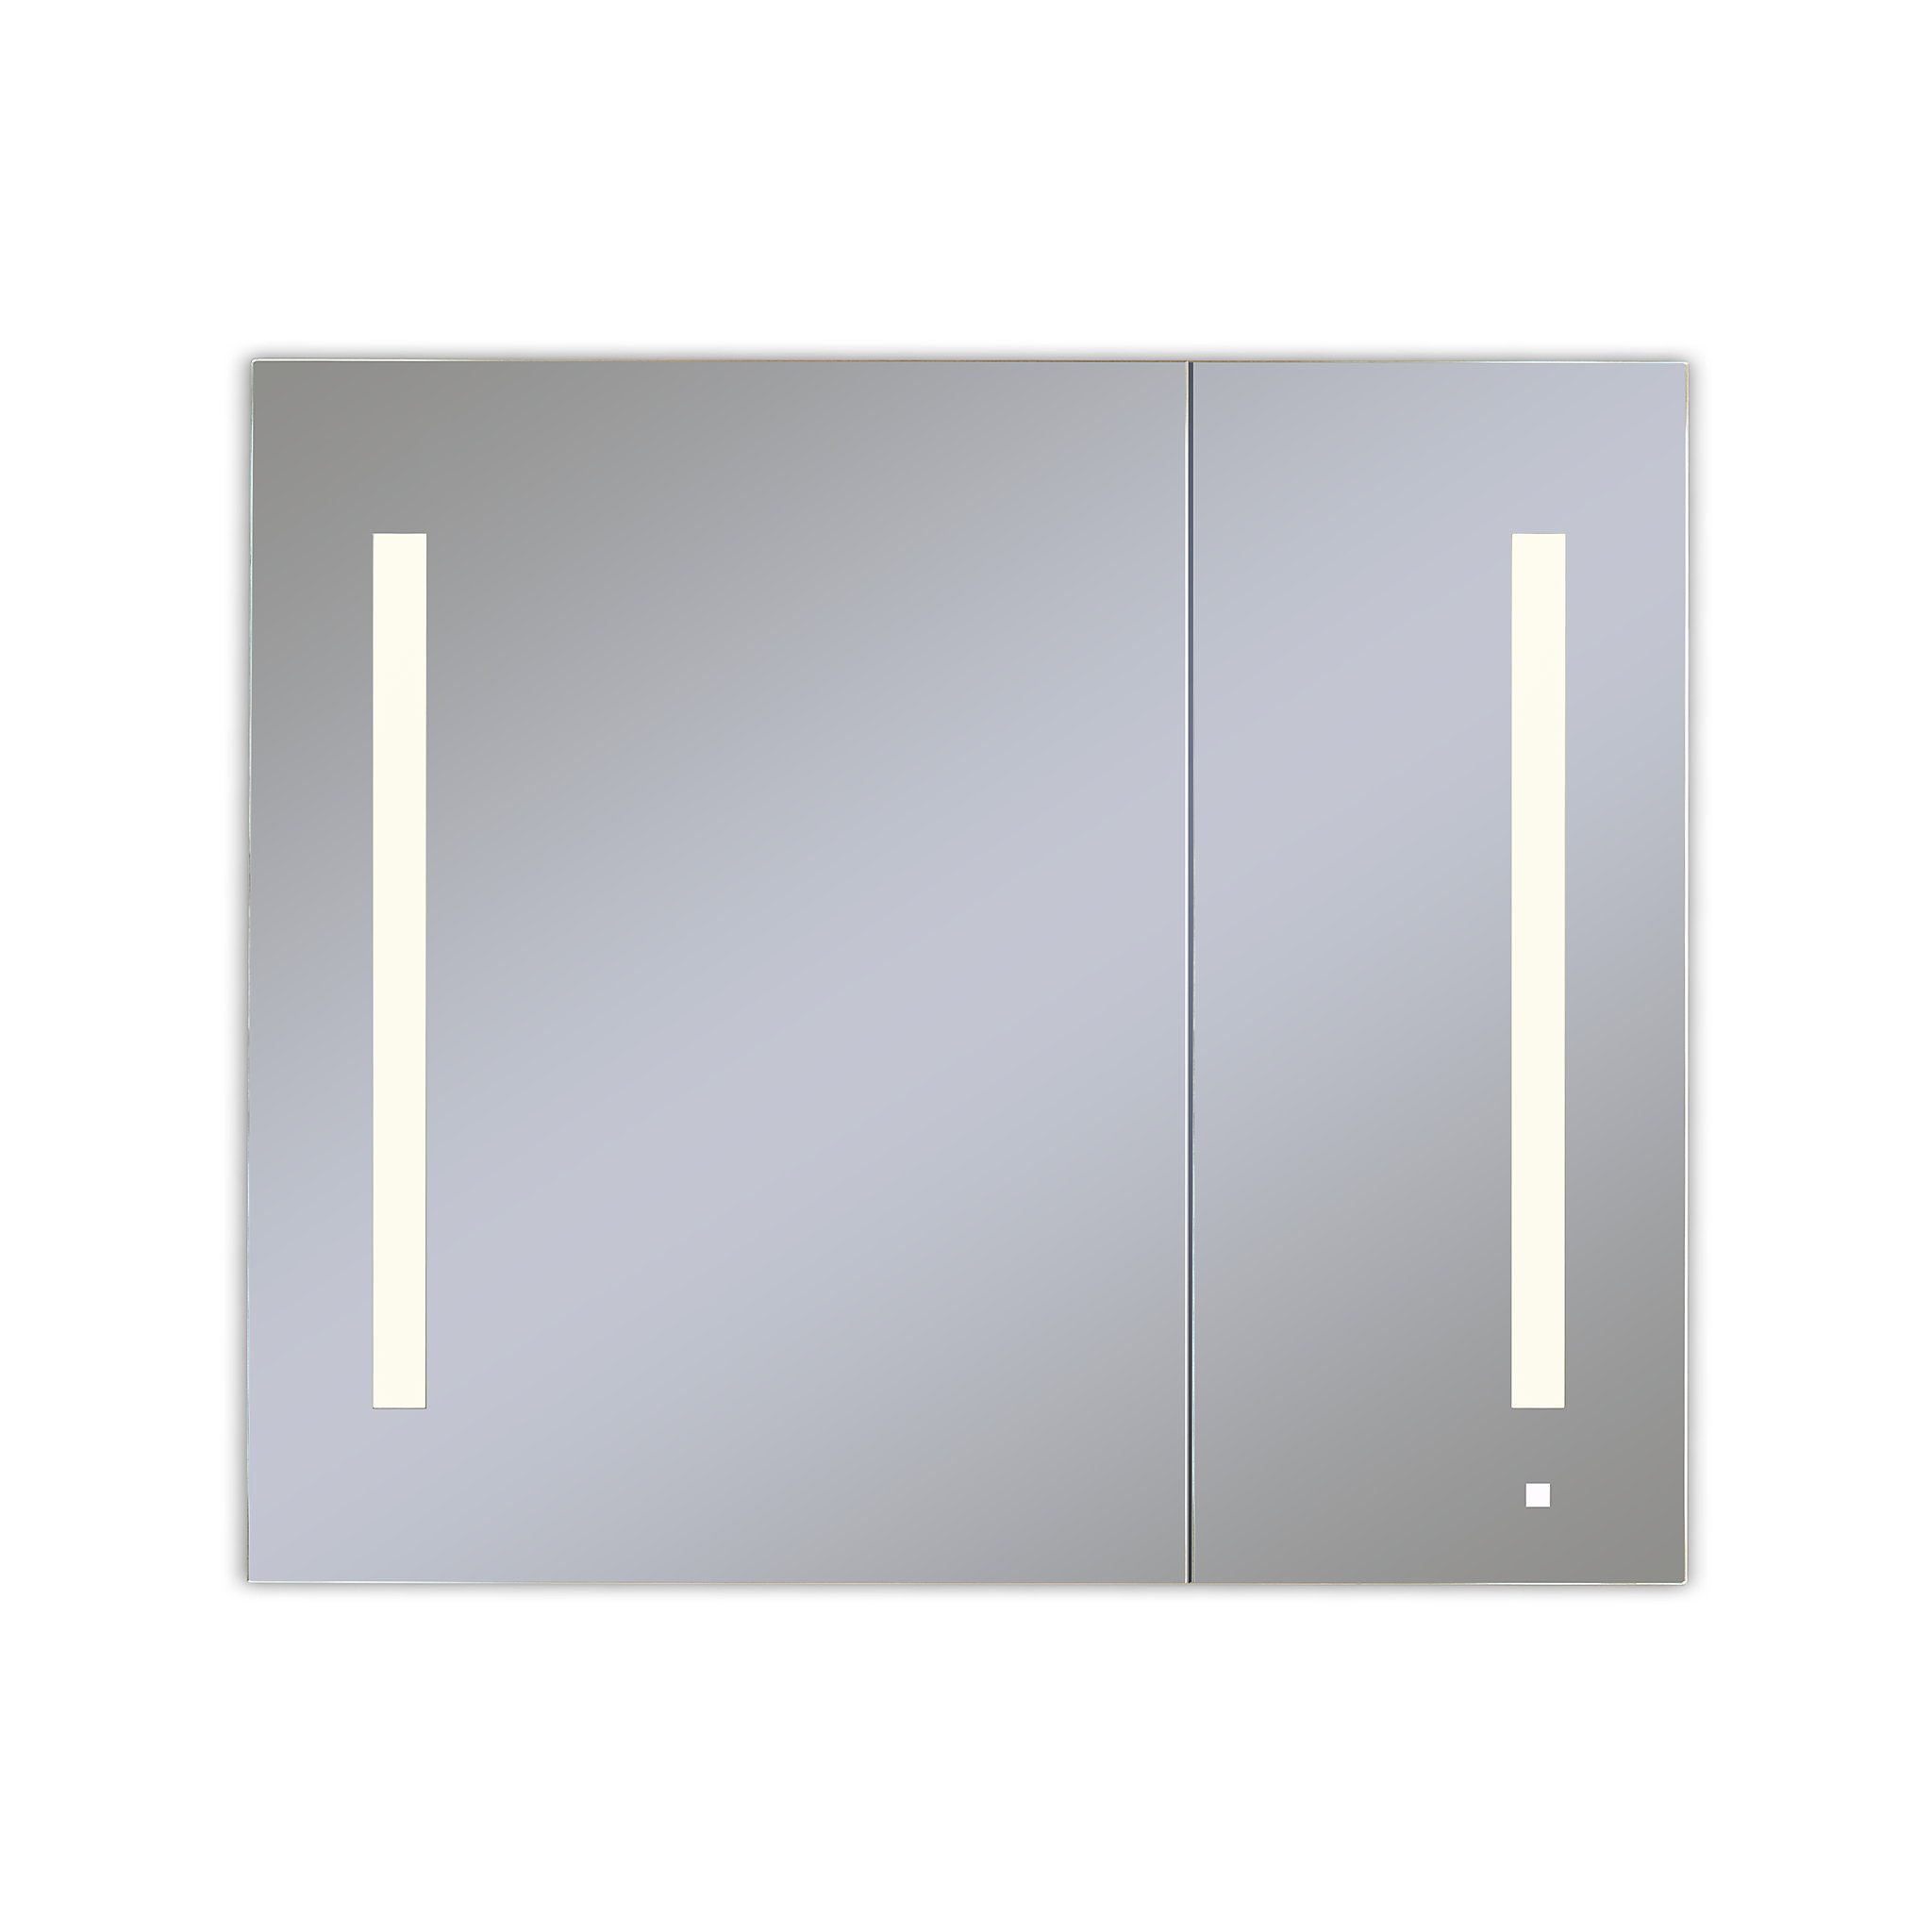 Robern AC3630D4P2LW AiO Lighted Cabinet, 36" x 30" x 4", Two Door, LUM Lighting, 2700K Temperature (Warm Light), Dimmable, Elect